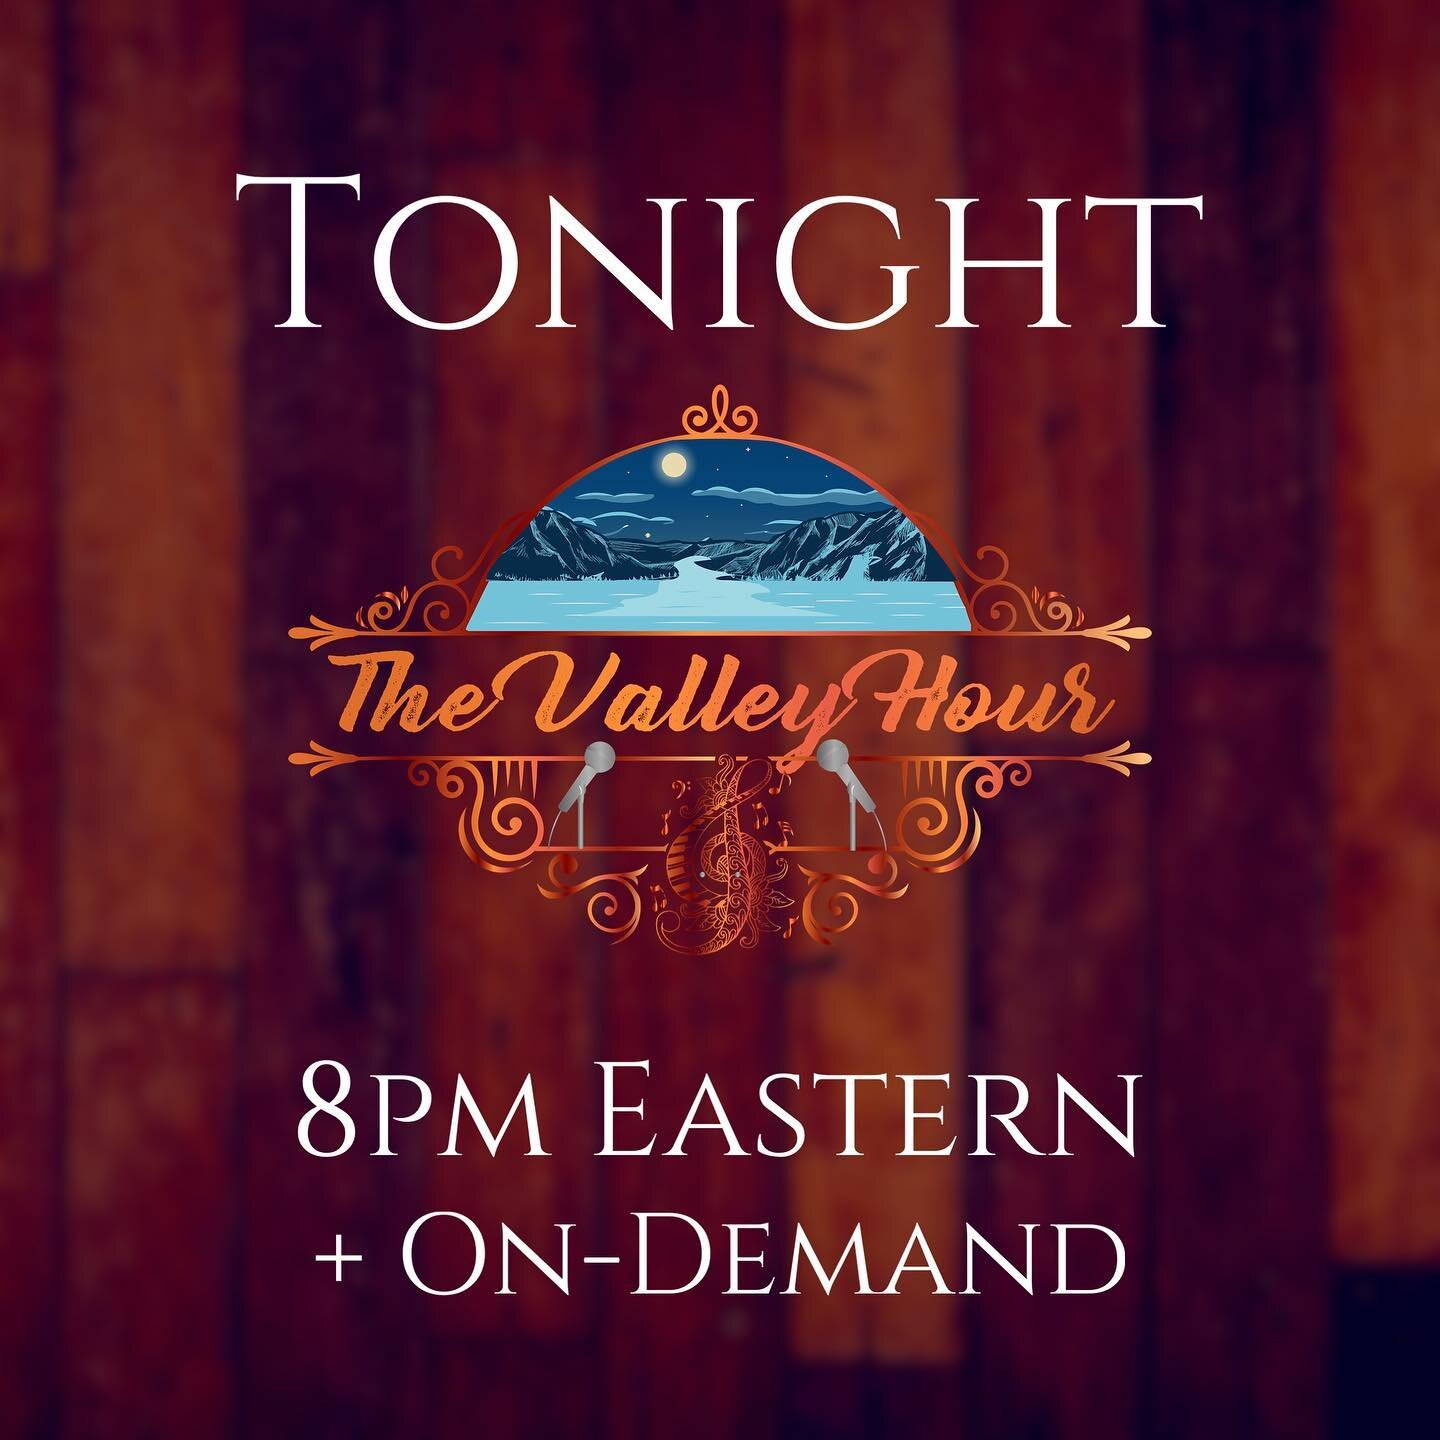 Join us for our SEASON FINALE tonight as we welcome @beesinthebarn and @sarahbrownemusic. FREE to watch with a Digital Pass, or get it On Demand to watch at your convenience &mdash;&gt; Link in Bio
#thevalleyhour #TVH #tonight #livestream #concertser